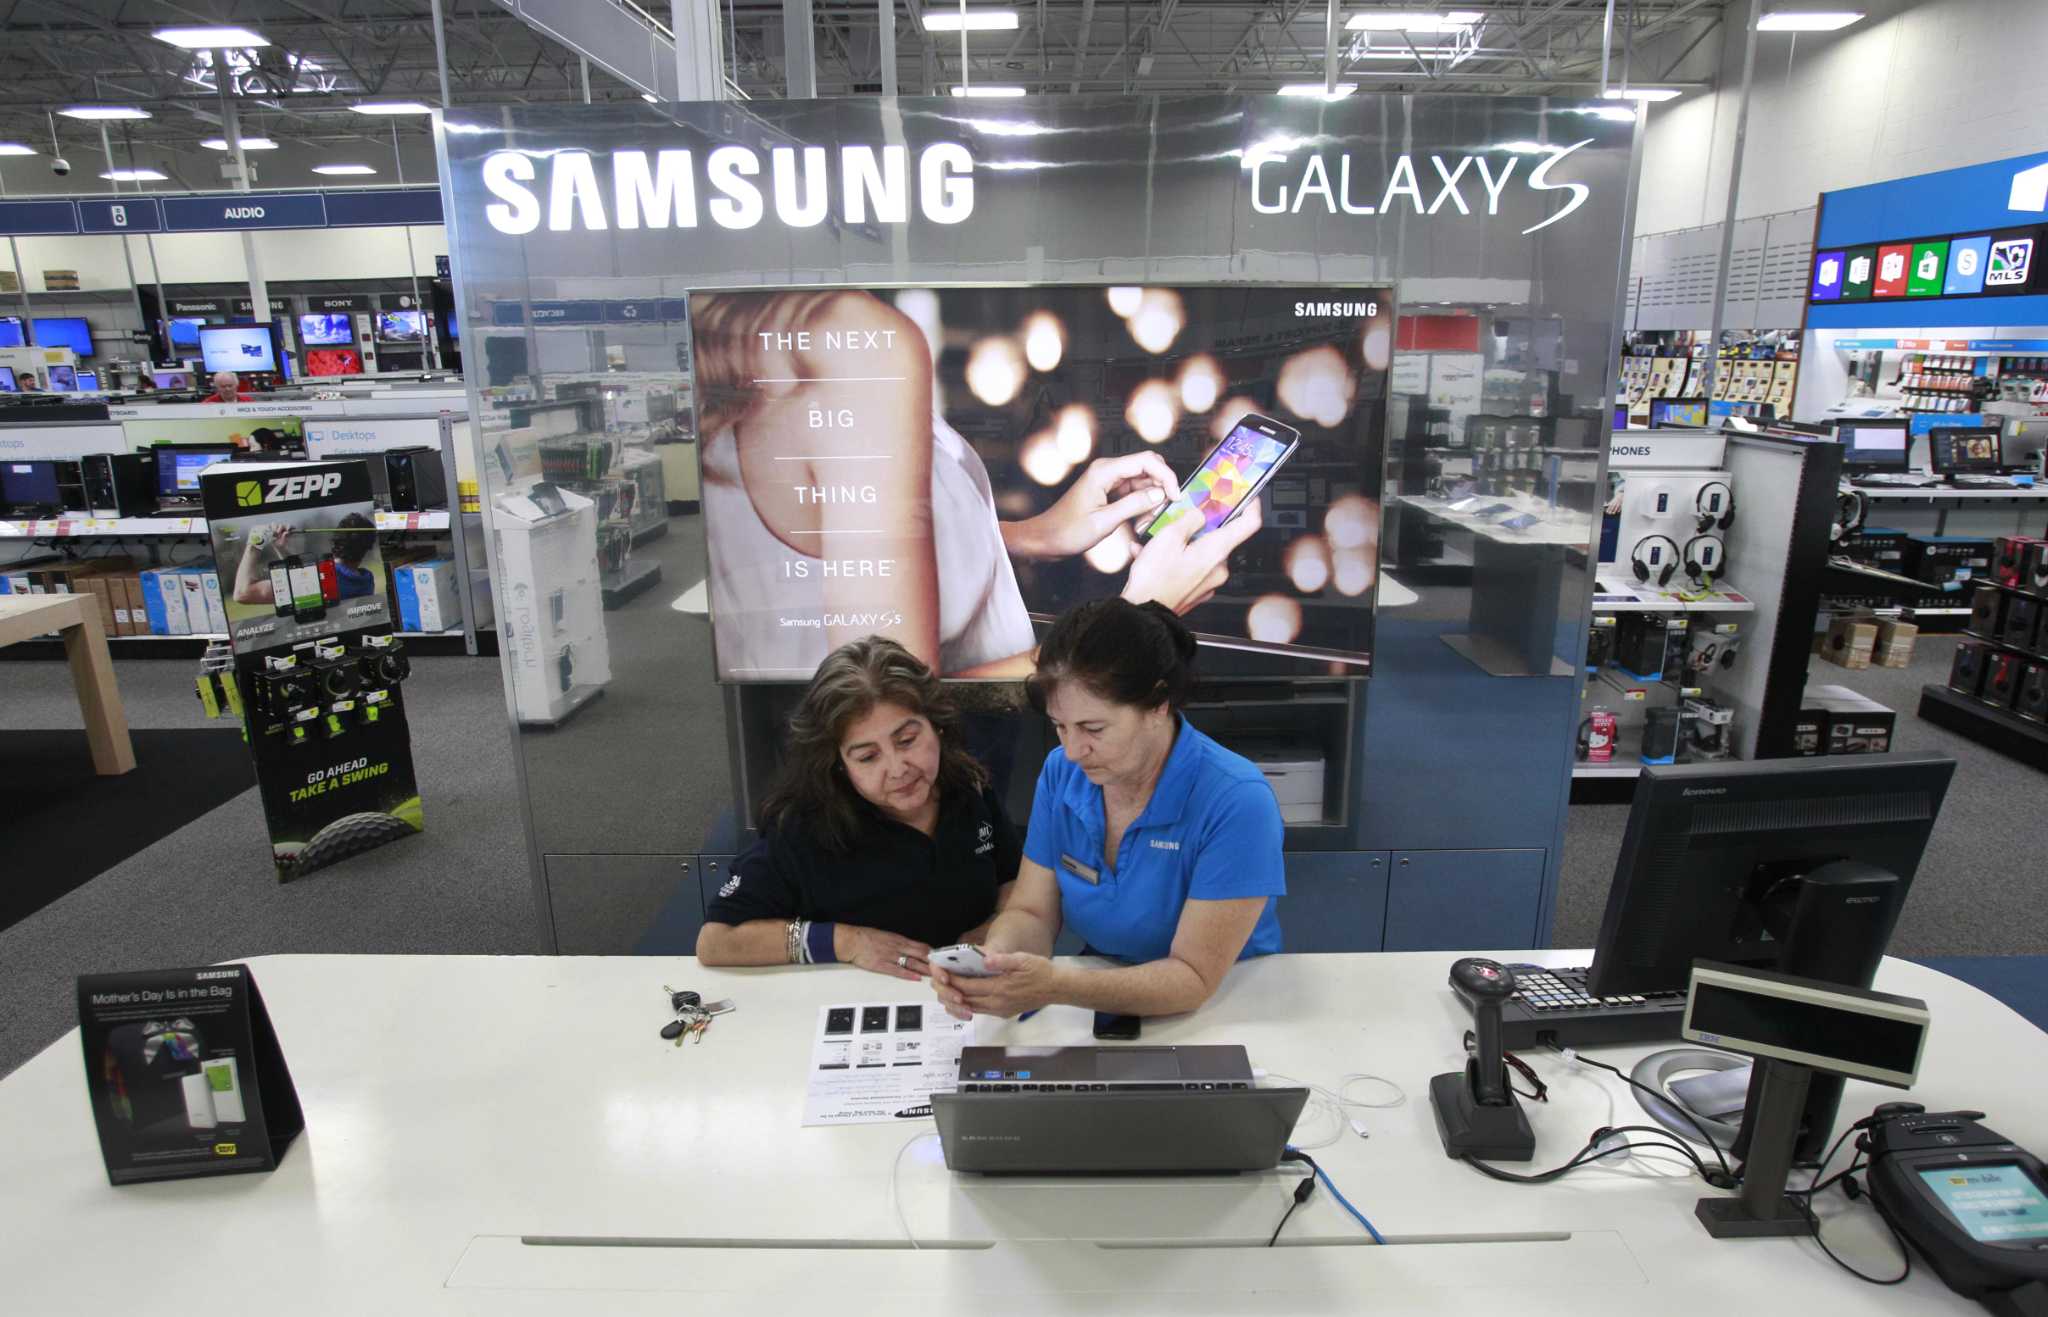 Samsung Experience store to open in the Galleria mall - Houston Chronicle